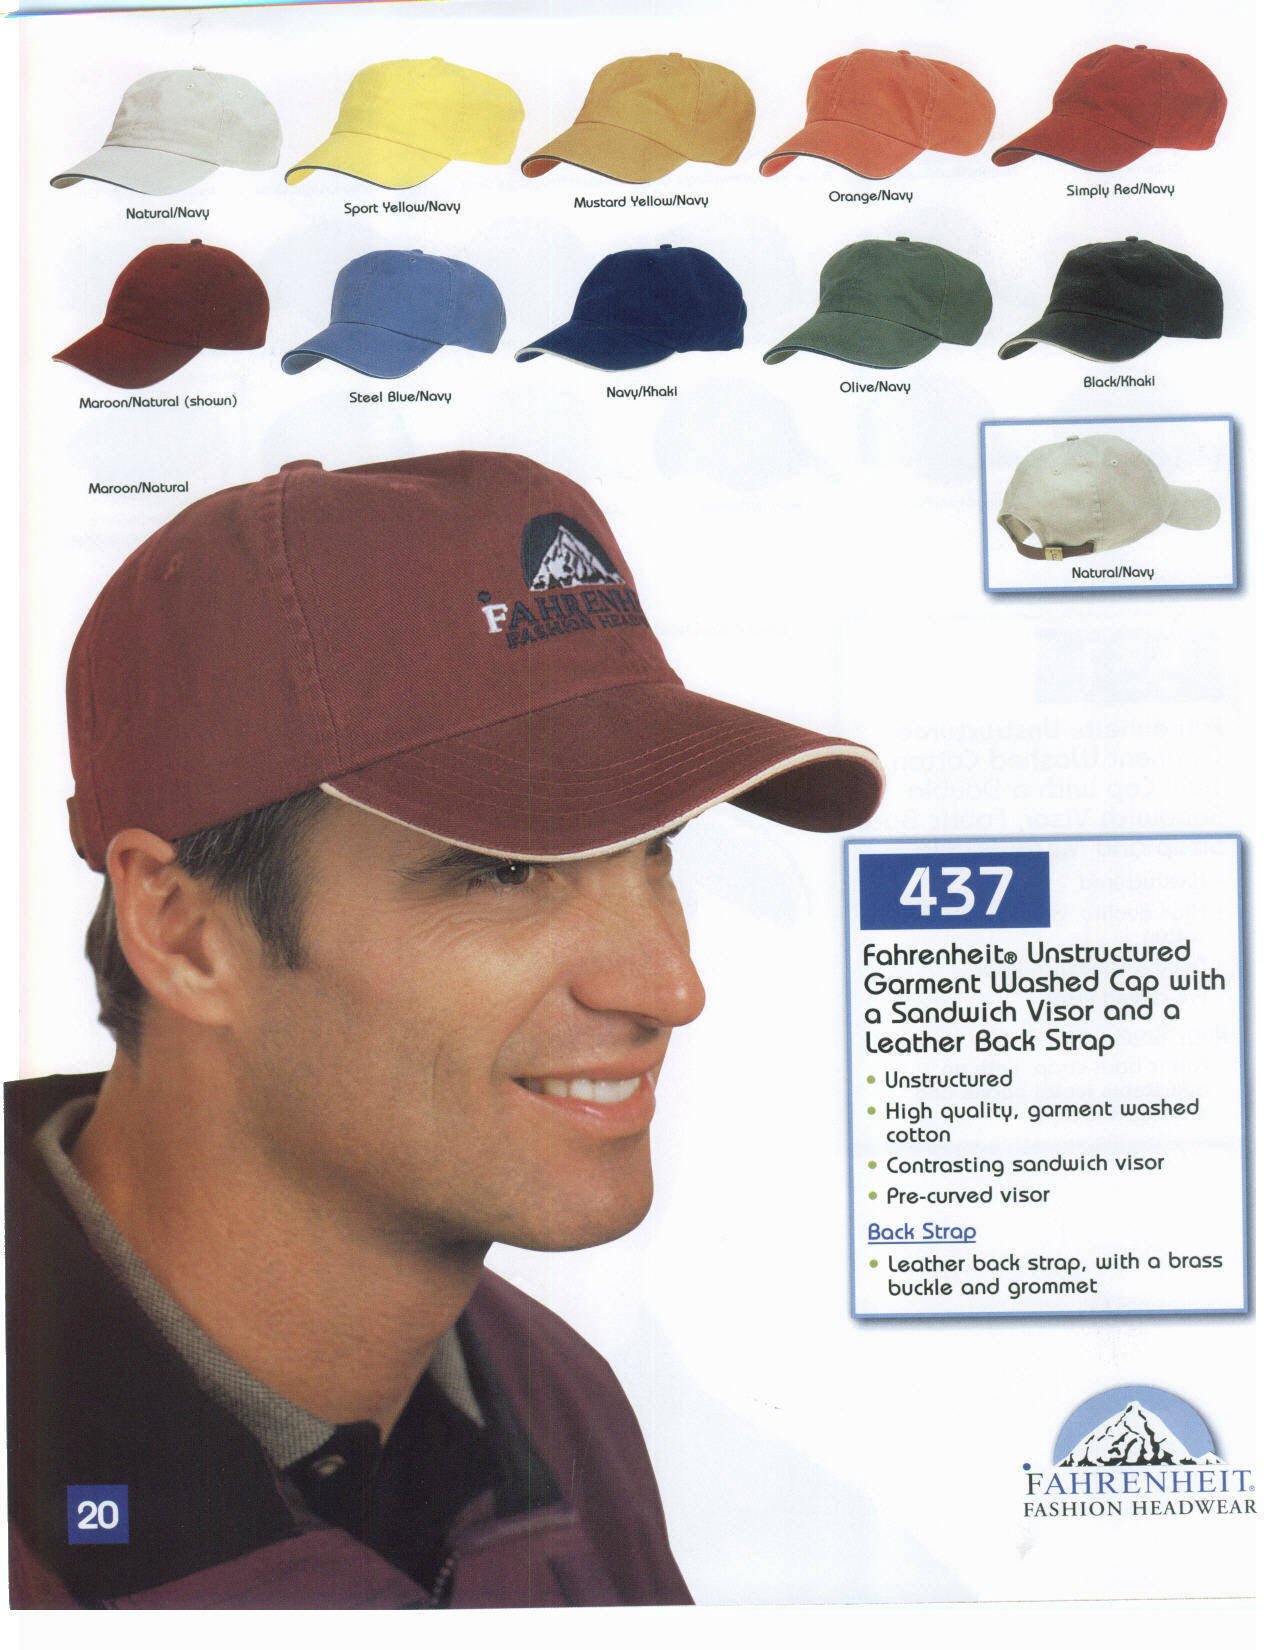 Unstructured Garment Washed Cap with a leather back strap